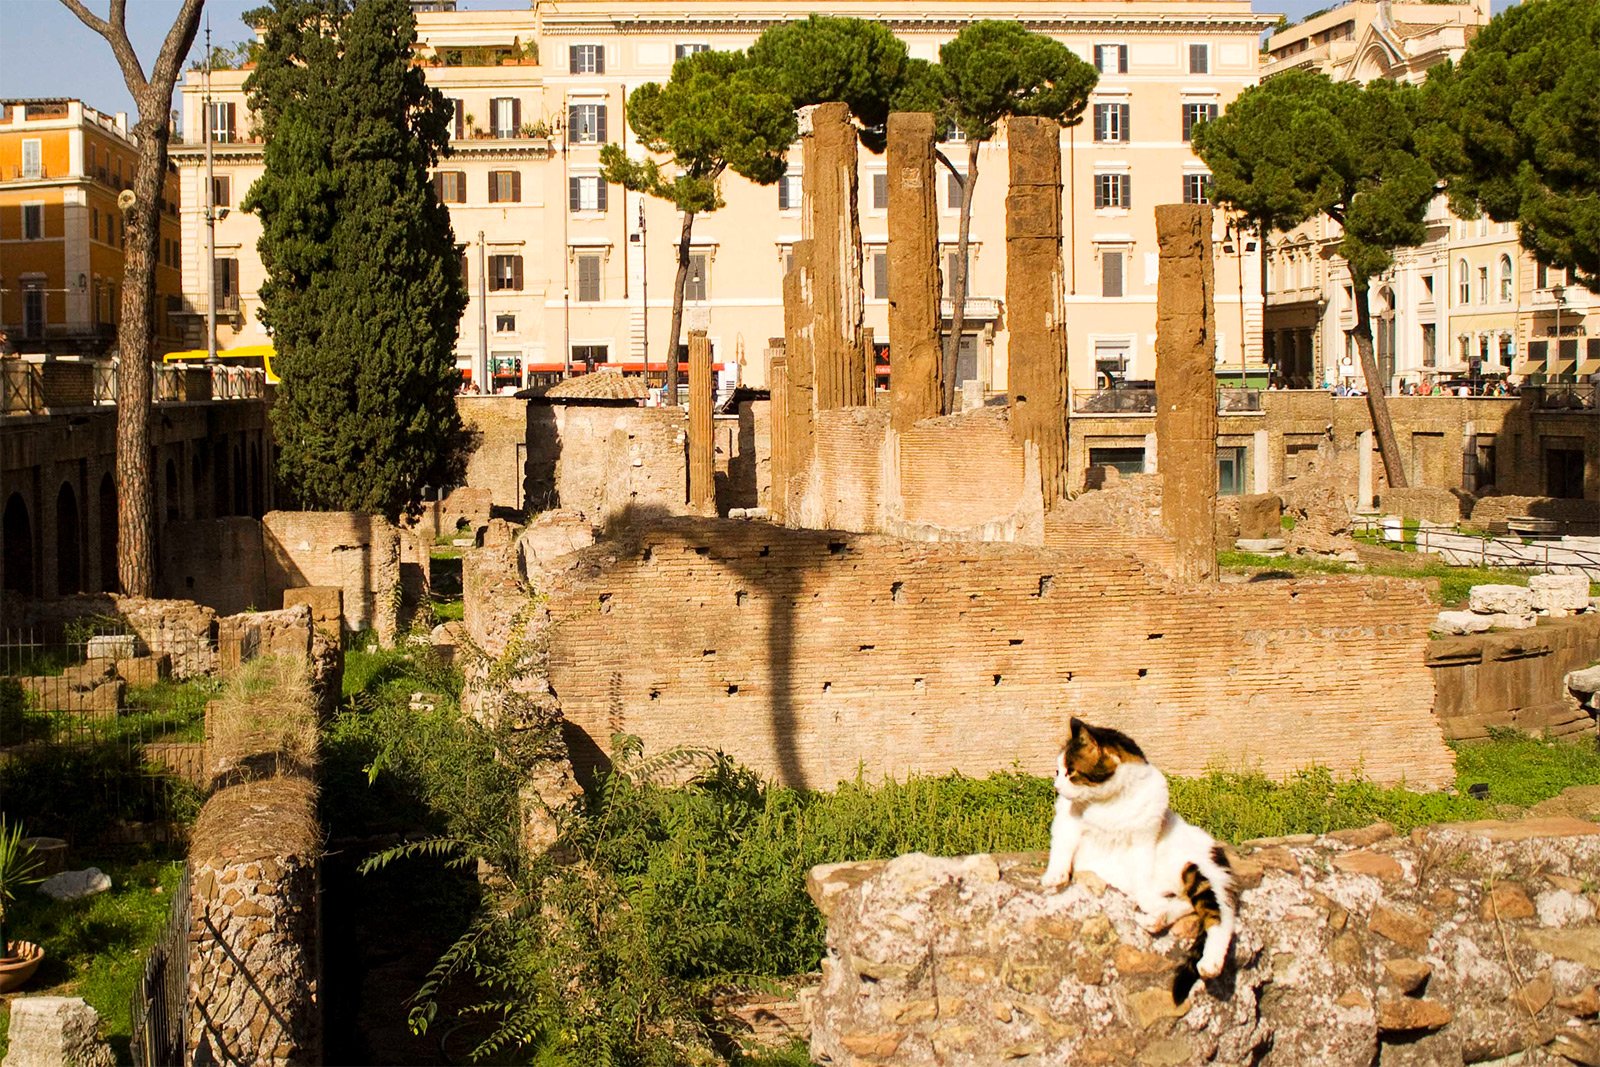 How to feed the cats in the ruins of Largo di Torre Argentina in Rome